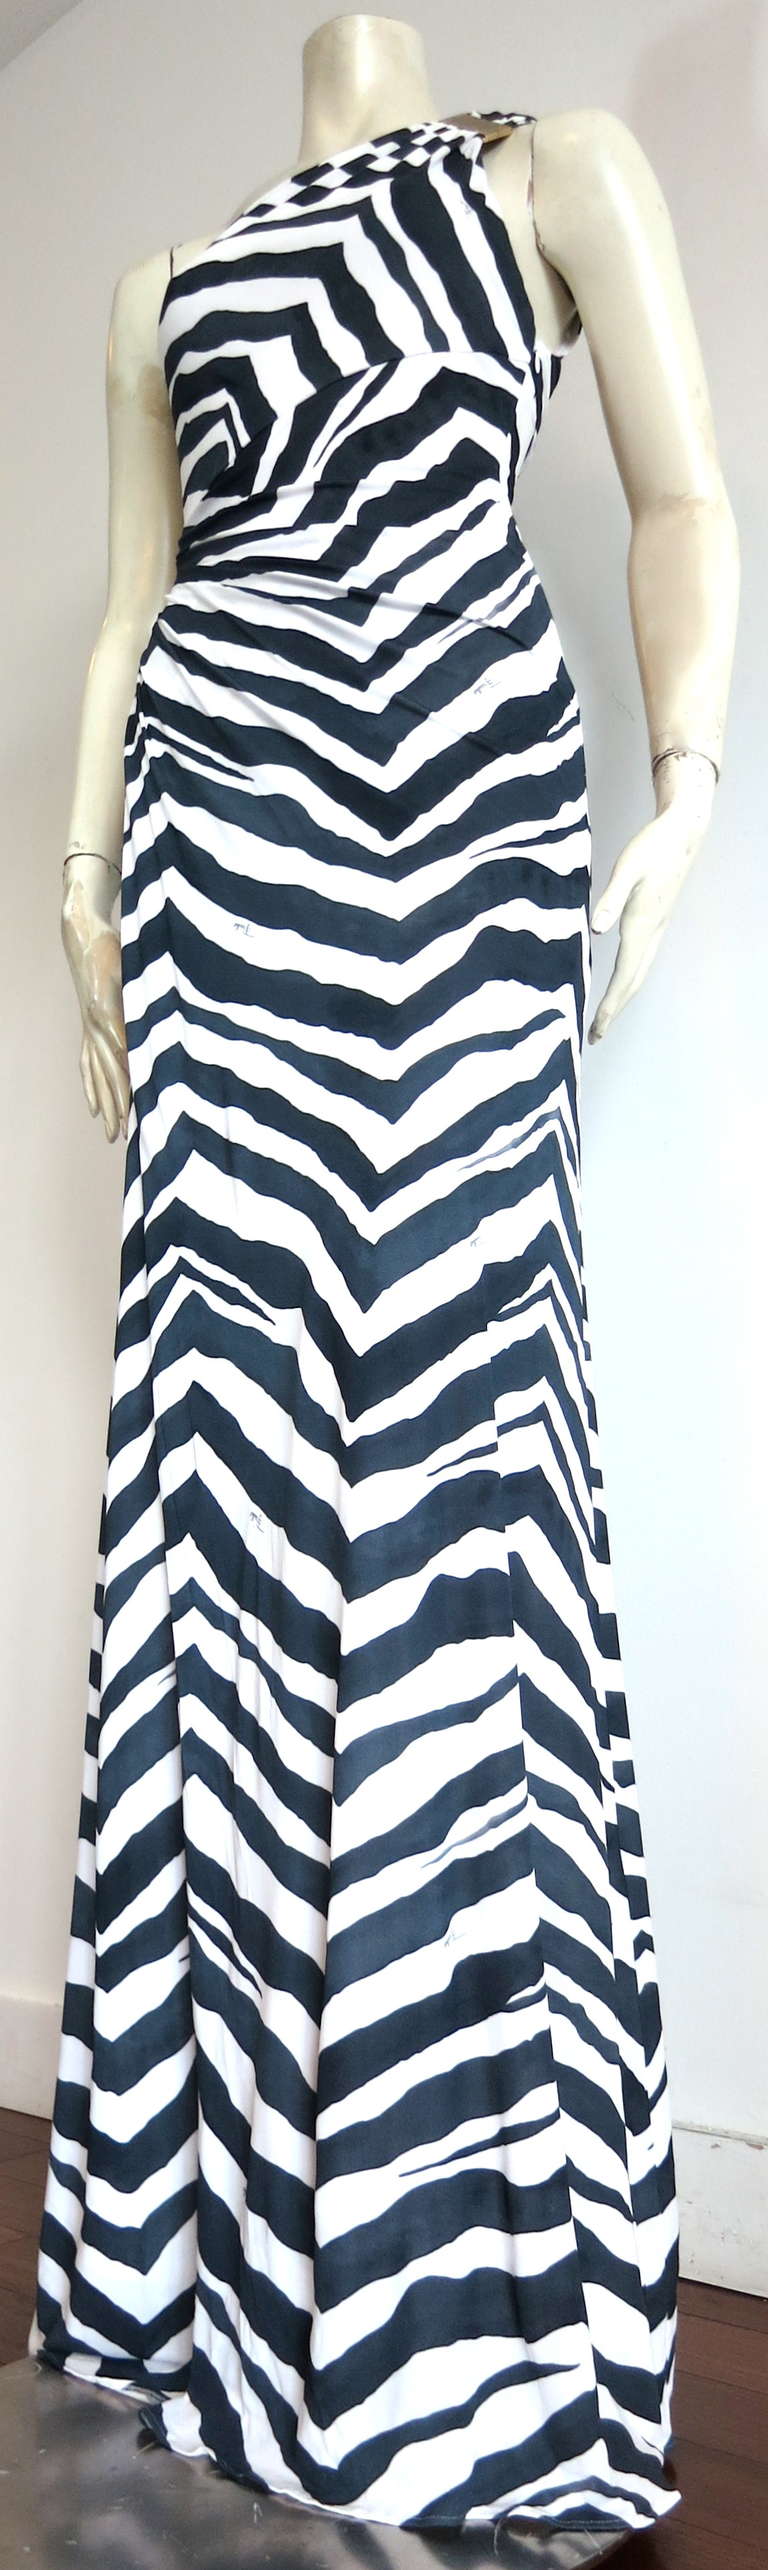 Gorgeous EMILIO PUCCI signed zebra print dress.

This recent dress from Emilio Pucci is made of printed silky, viscose knit jersey, and features a logo engraved, gold-finished metal, square hardware detail at the wearer's left